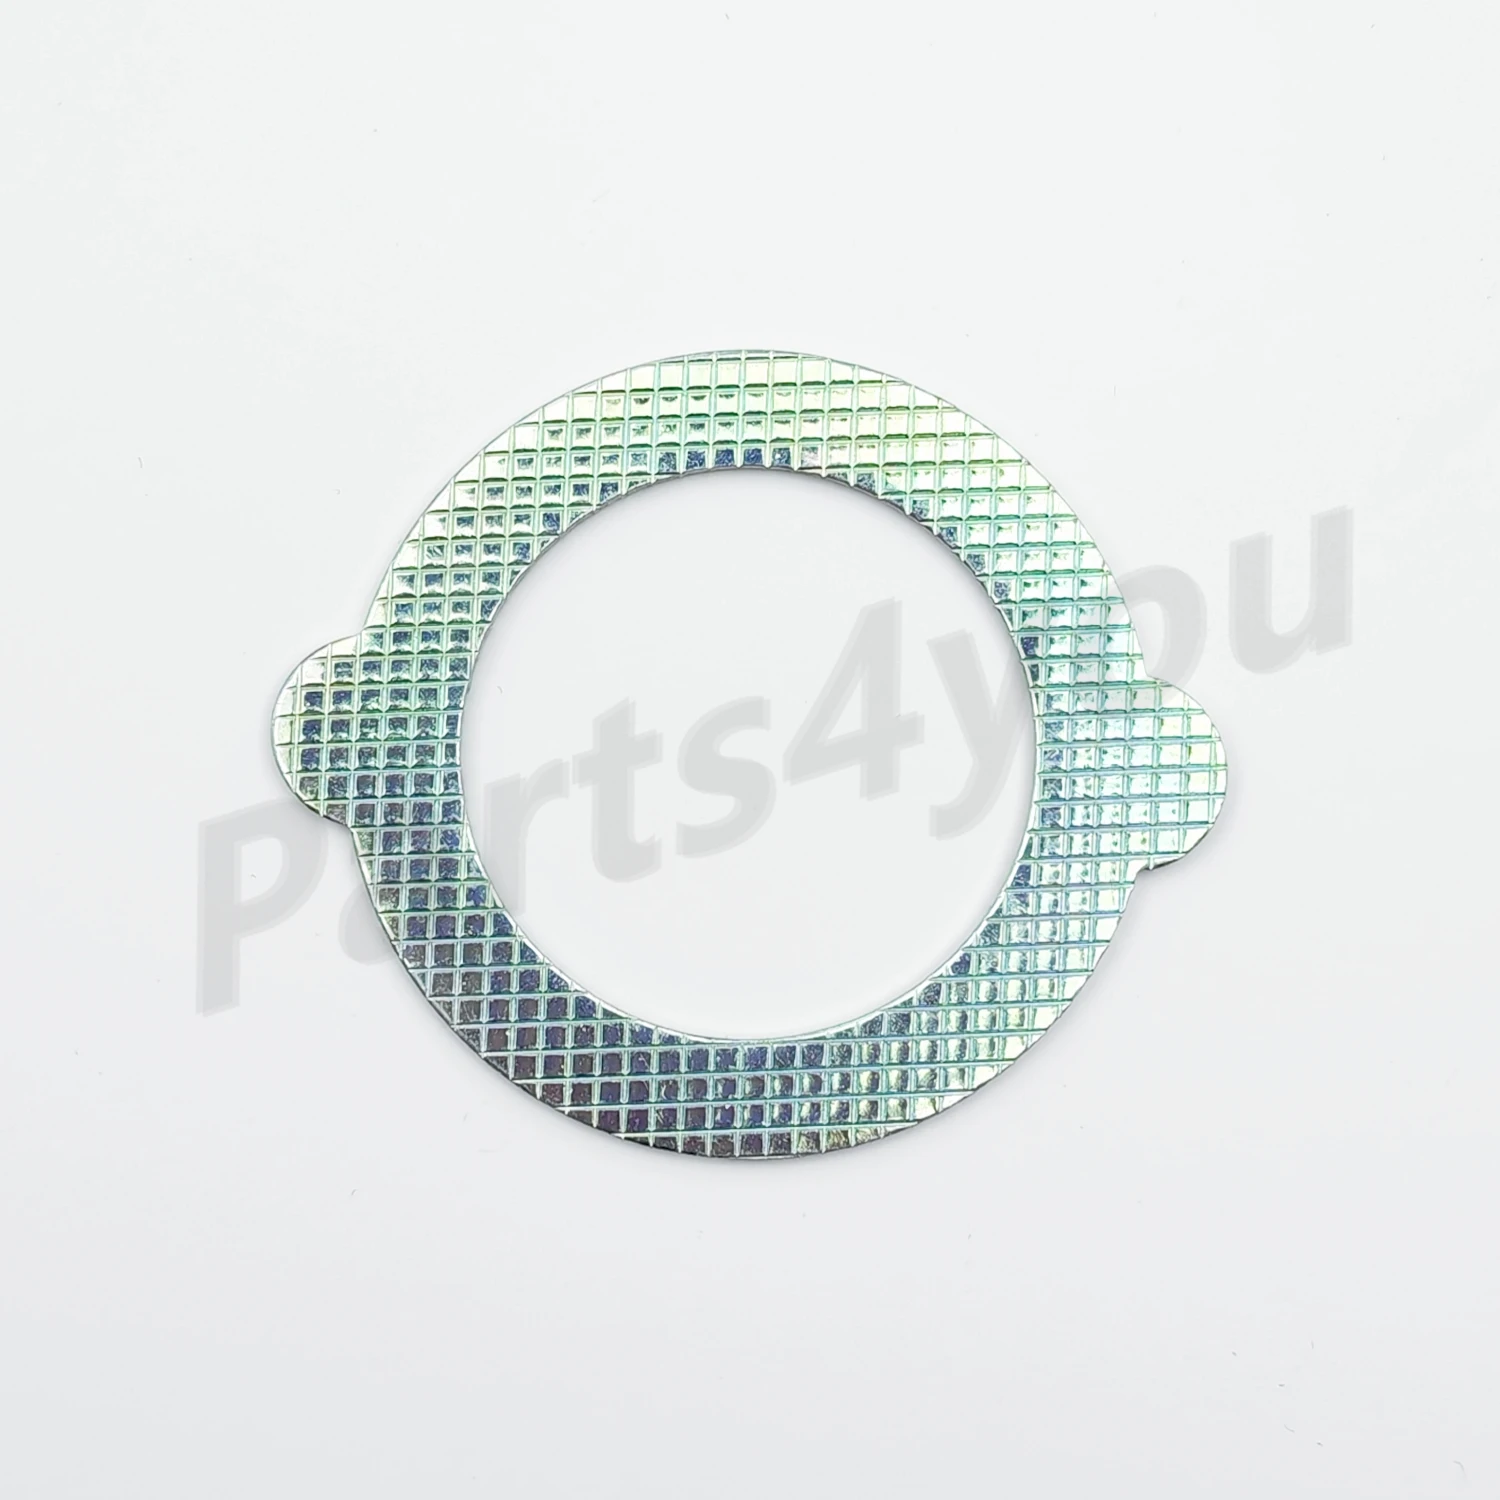 

Front Differential Shim Gasket for CFmoto 400 450 500 500S 520 500HO 550 600 625 800 800EX 800XC 850 950 1000 0180-313009-0010